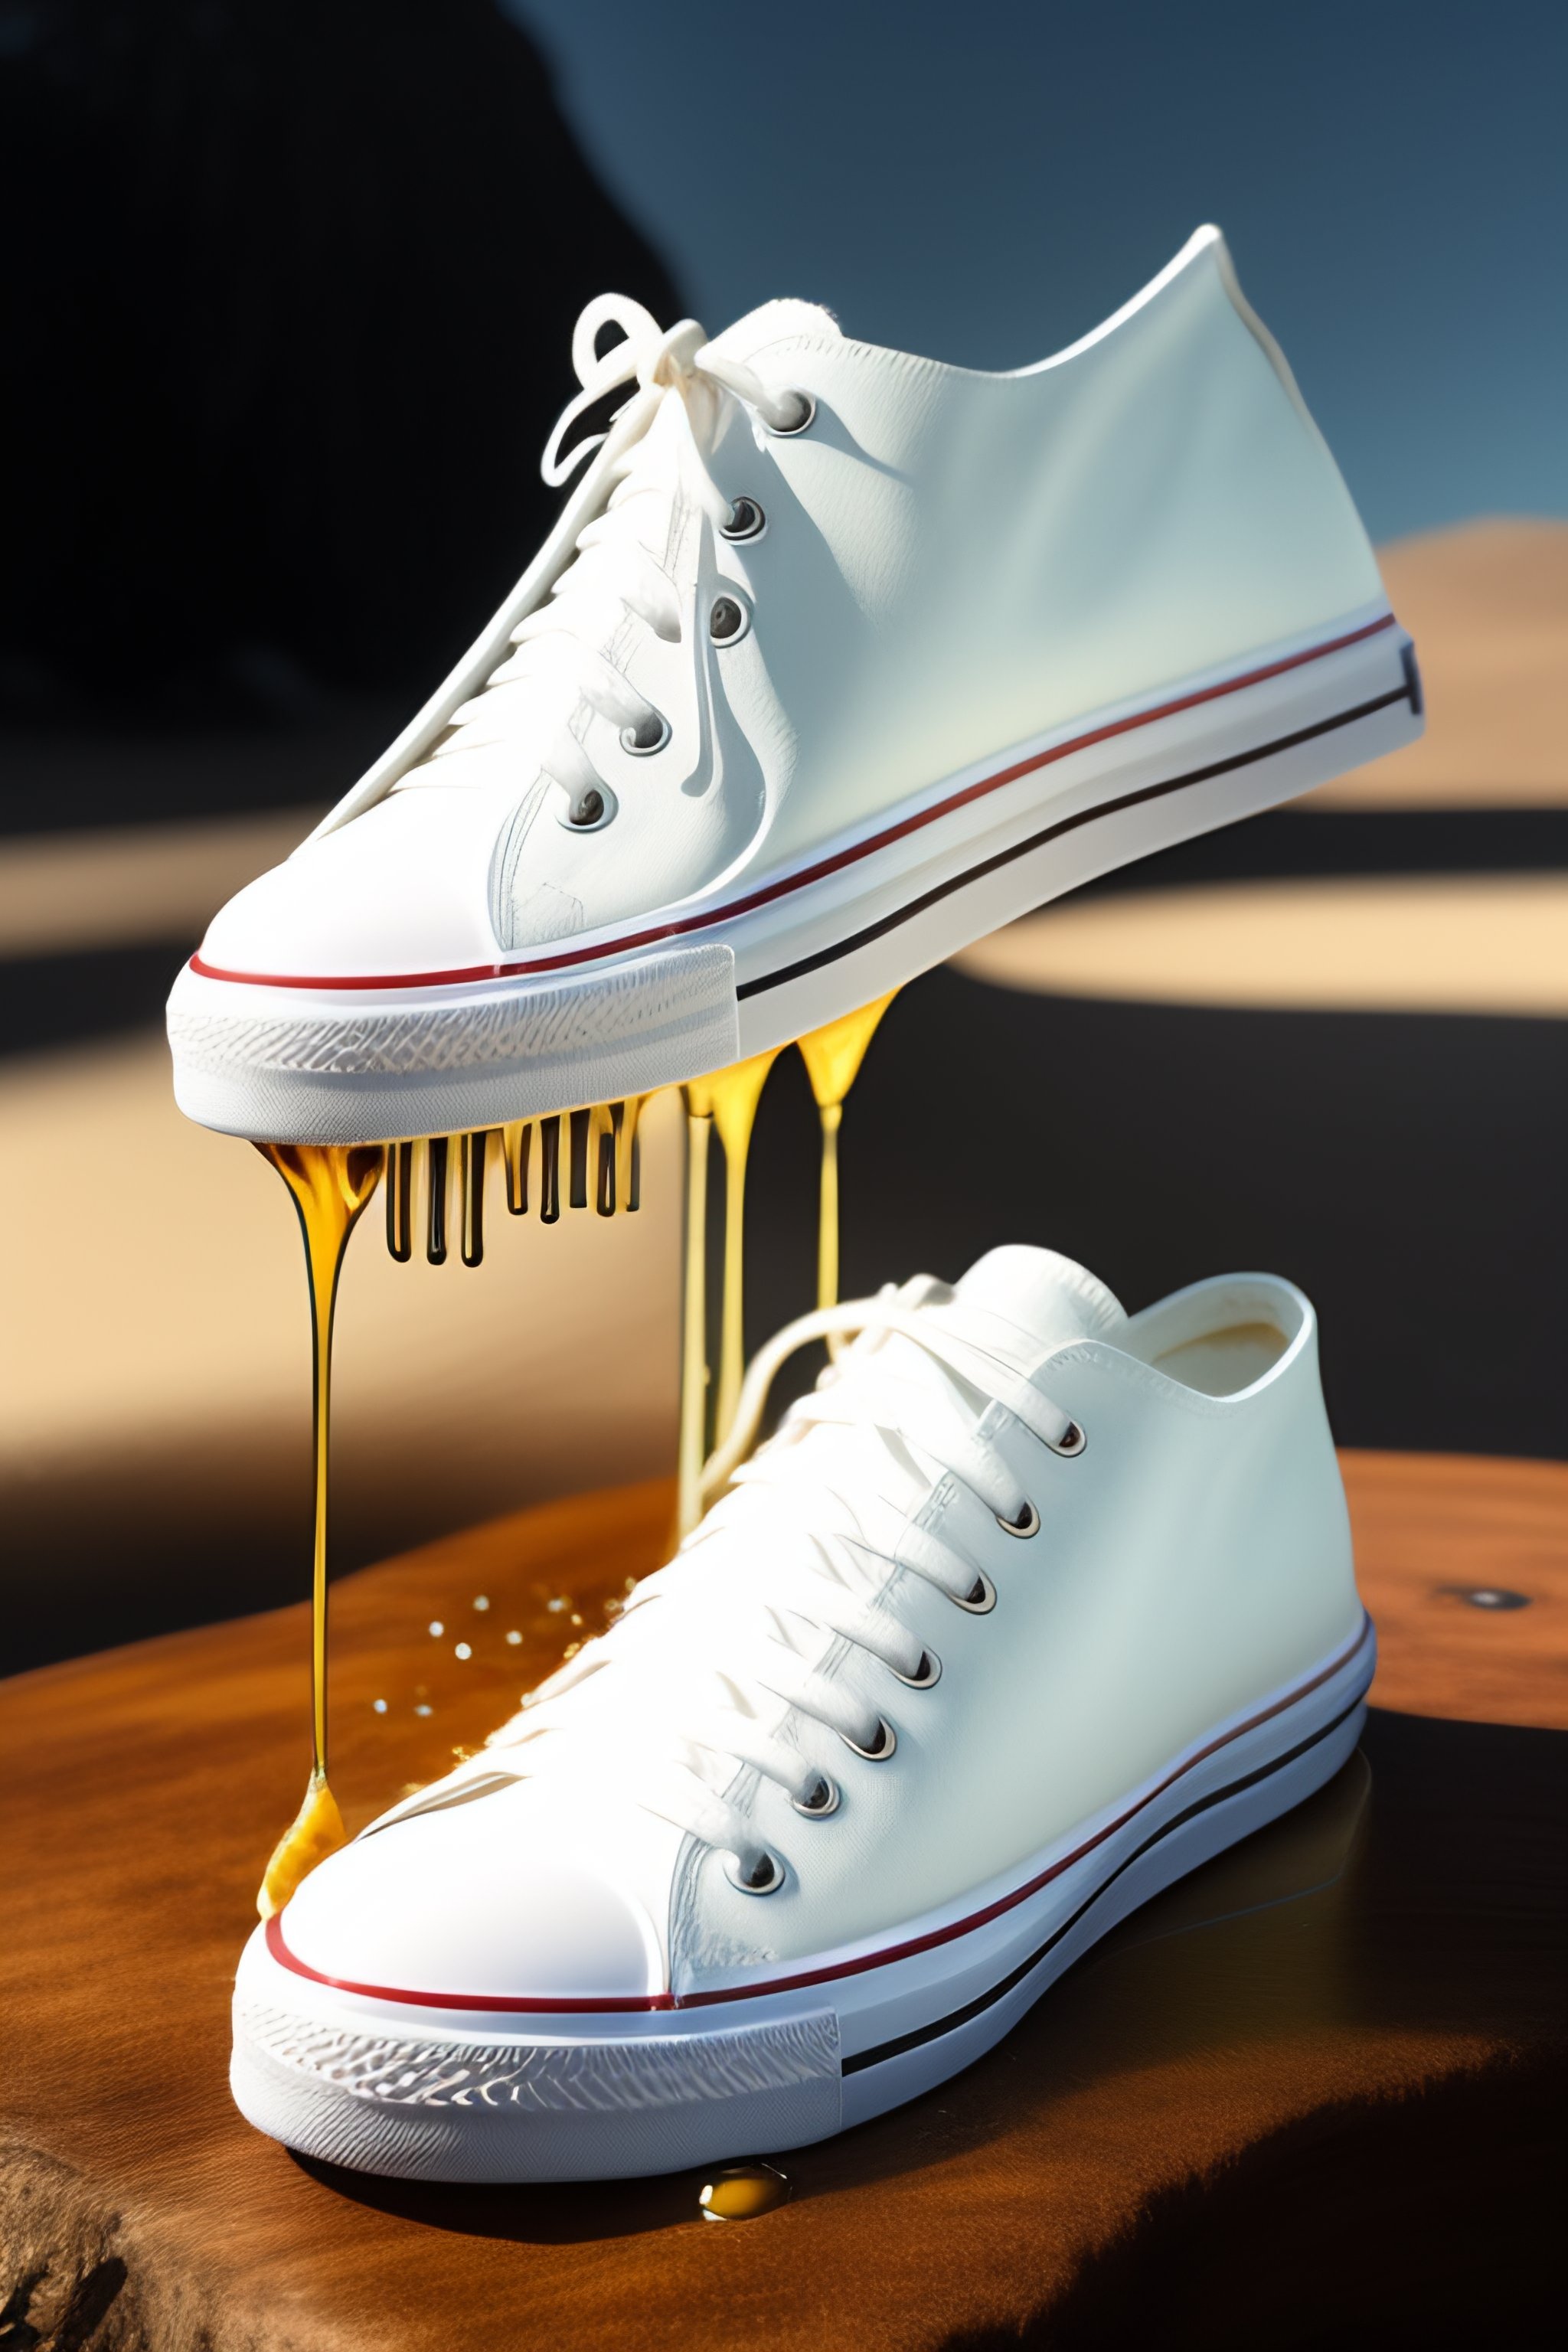 Lexica - A white shoe dripping paint